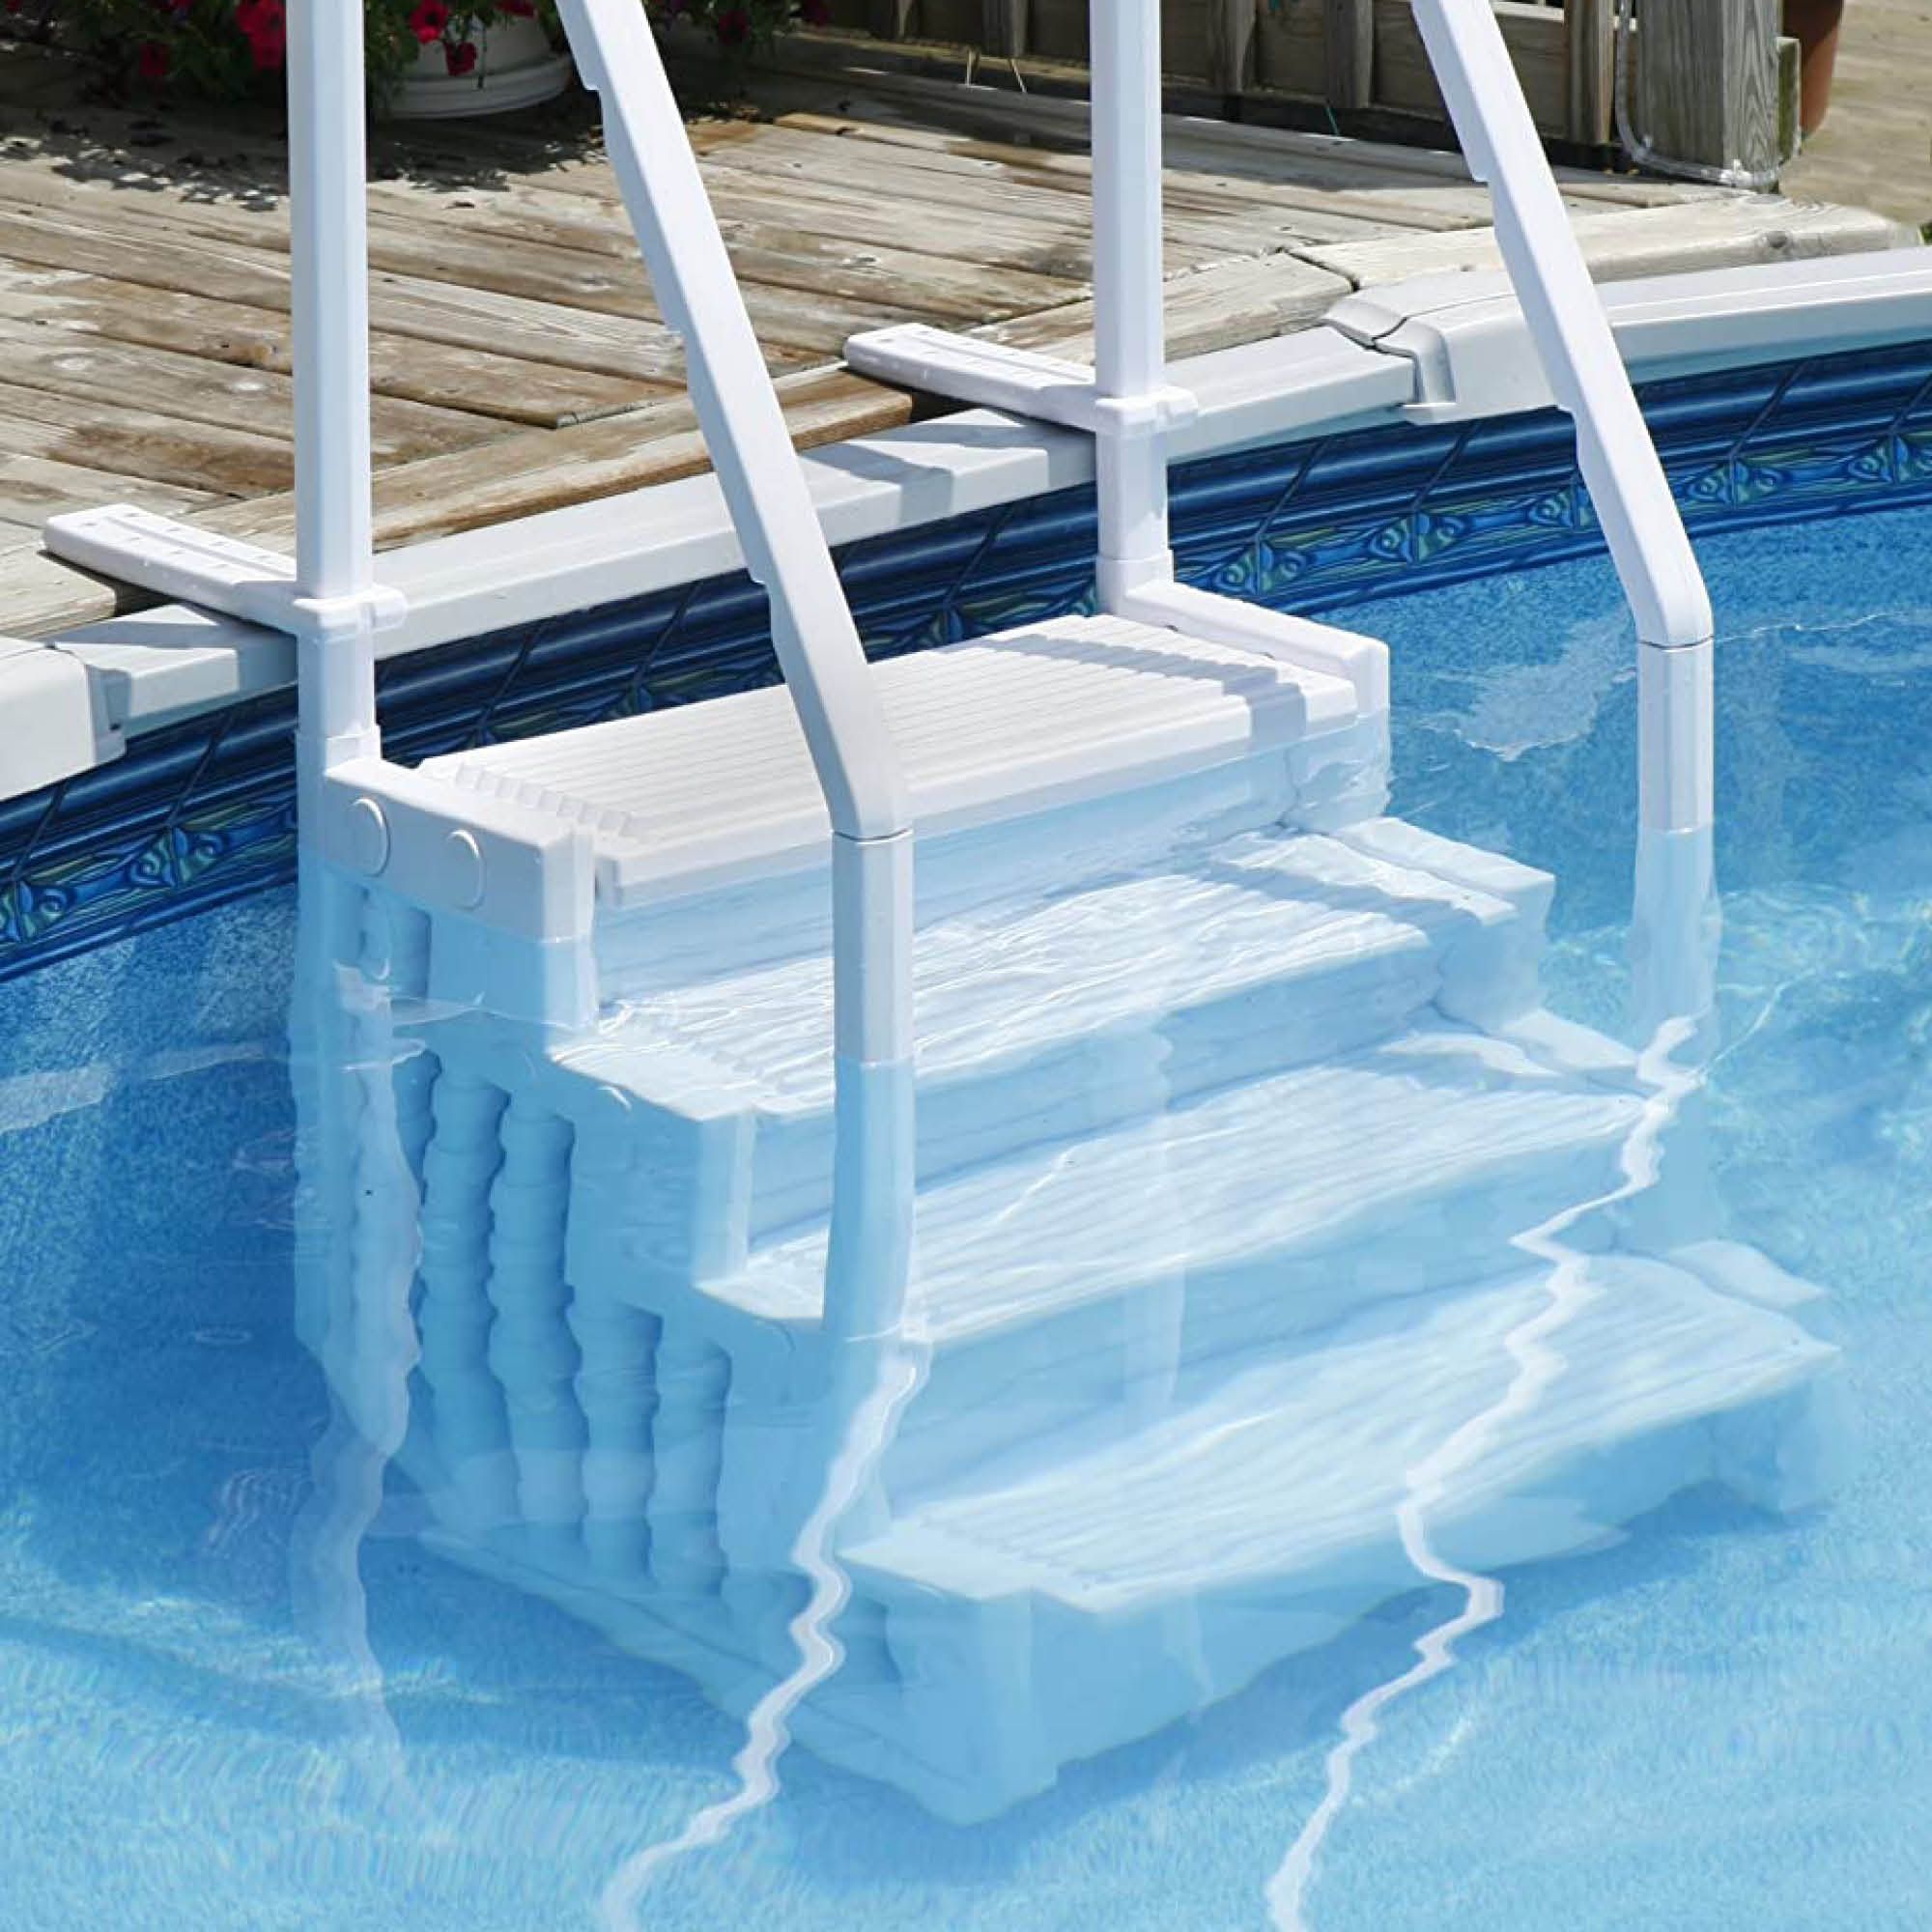 The 9 Best Pool Ladders 2021, How To Remove Above Ground Pool Steps